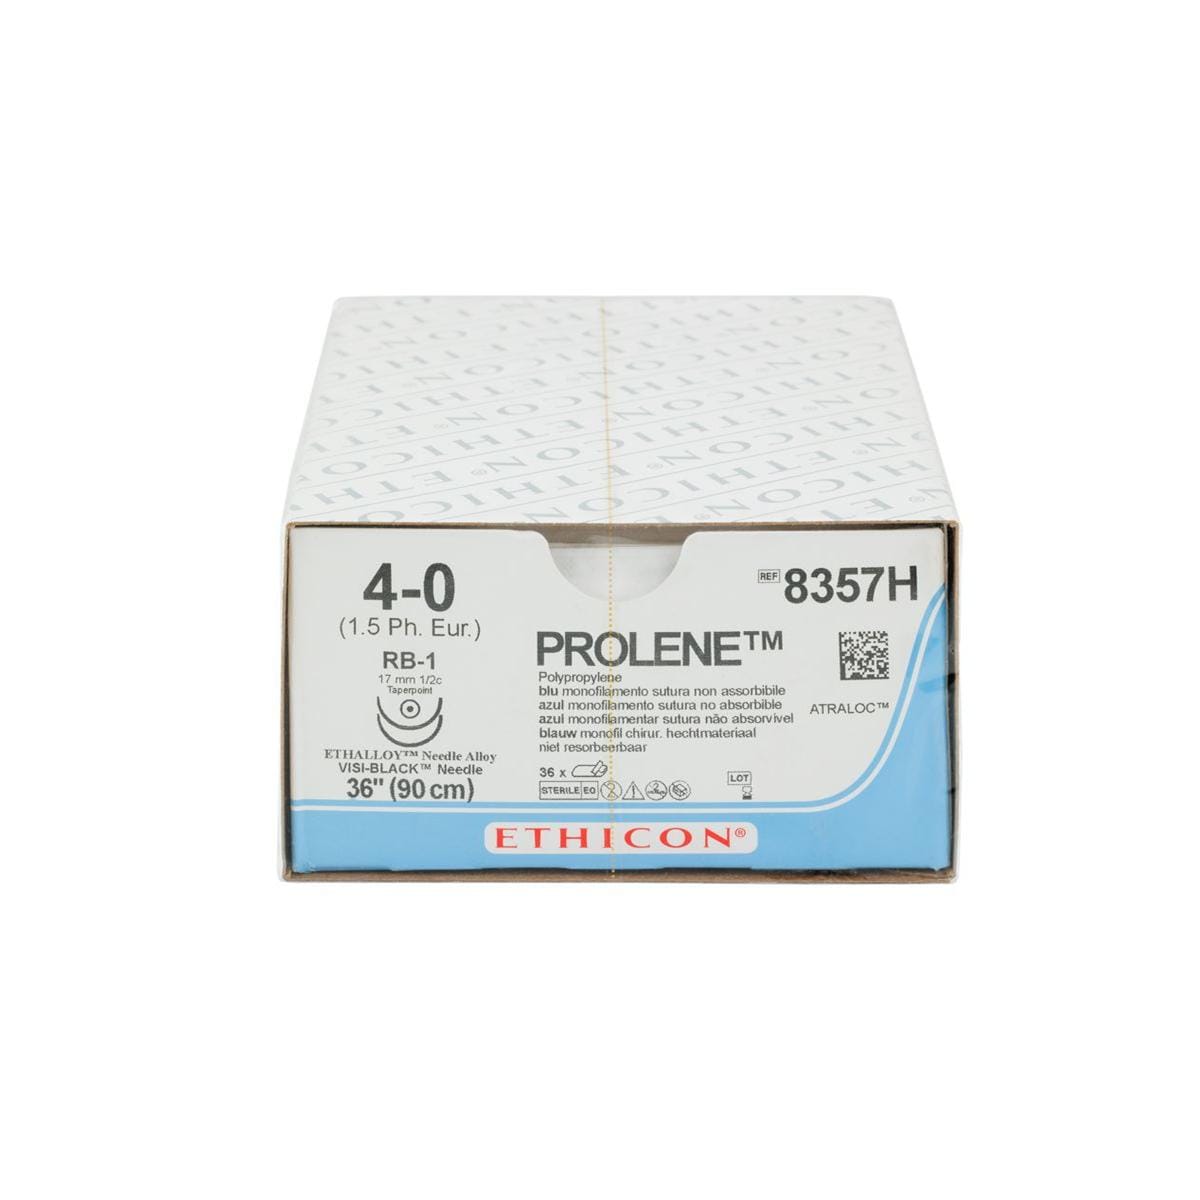 Prolene Sutures Blue Uncoated 45cm 4-0 1/2 Circle Taper Point RB-1 17mm 8357H 36pk